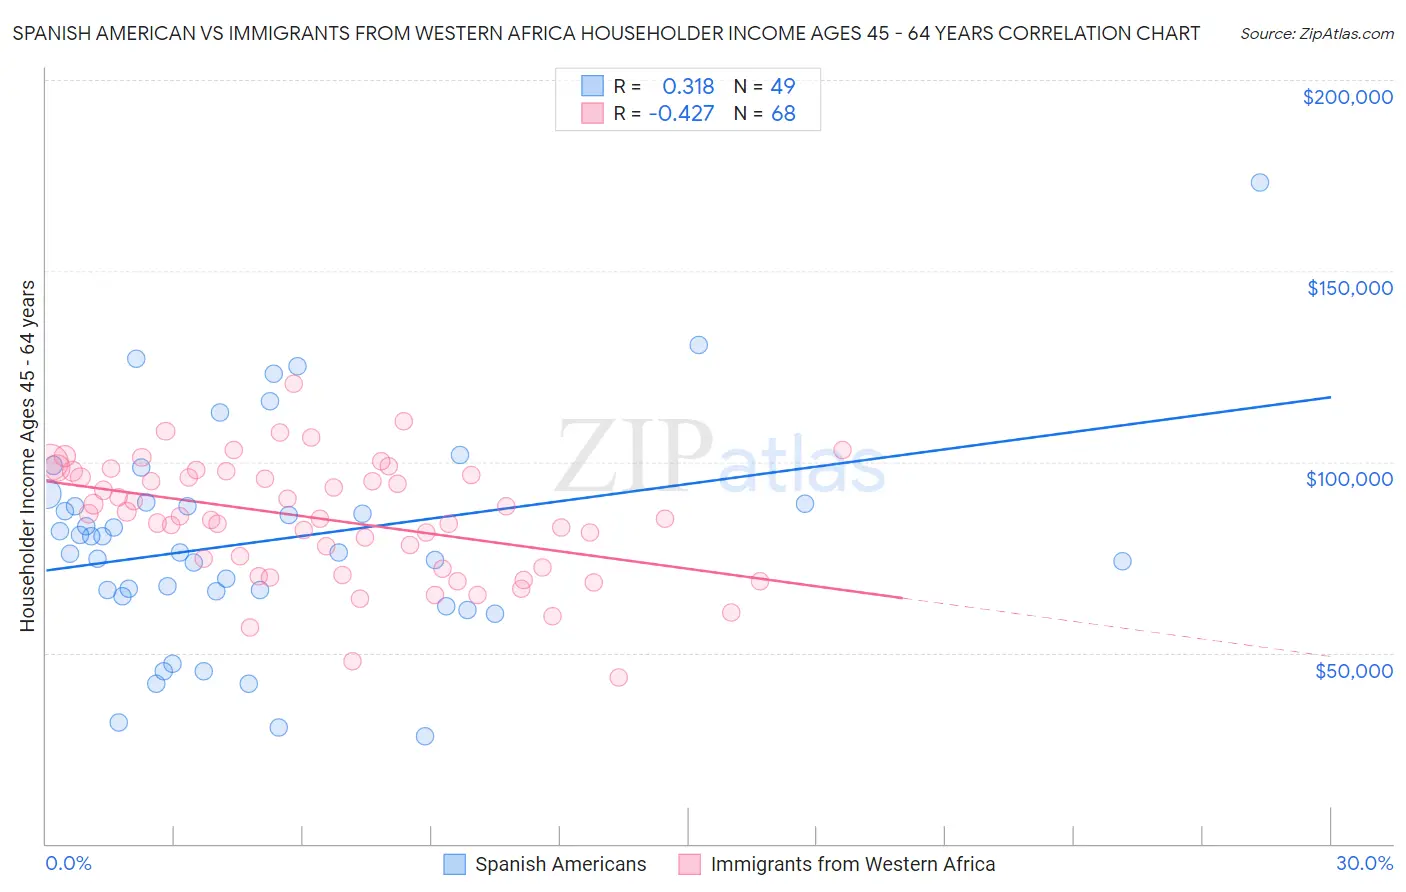 Spanish American vs Immigrants from Western Africa Householder Income Ages 45 - 64 years